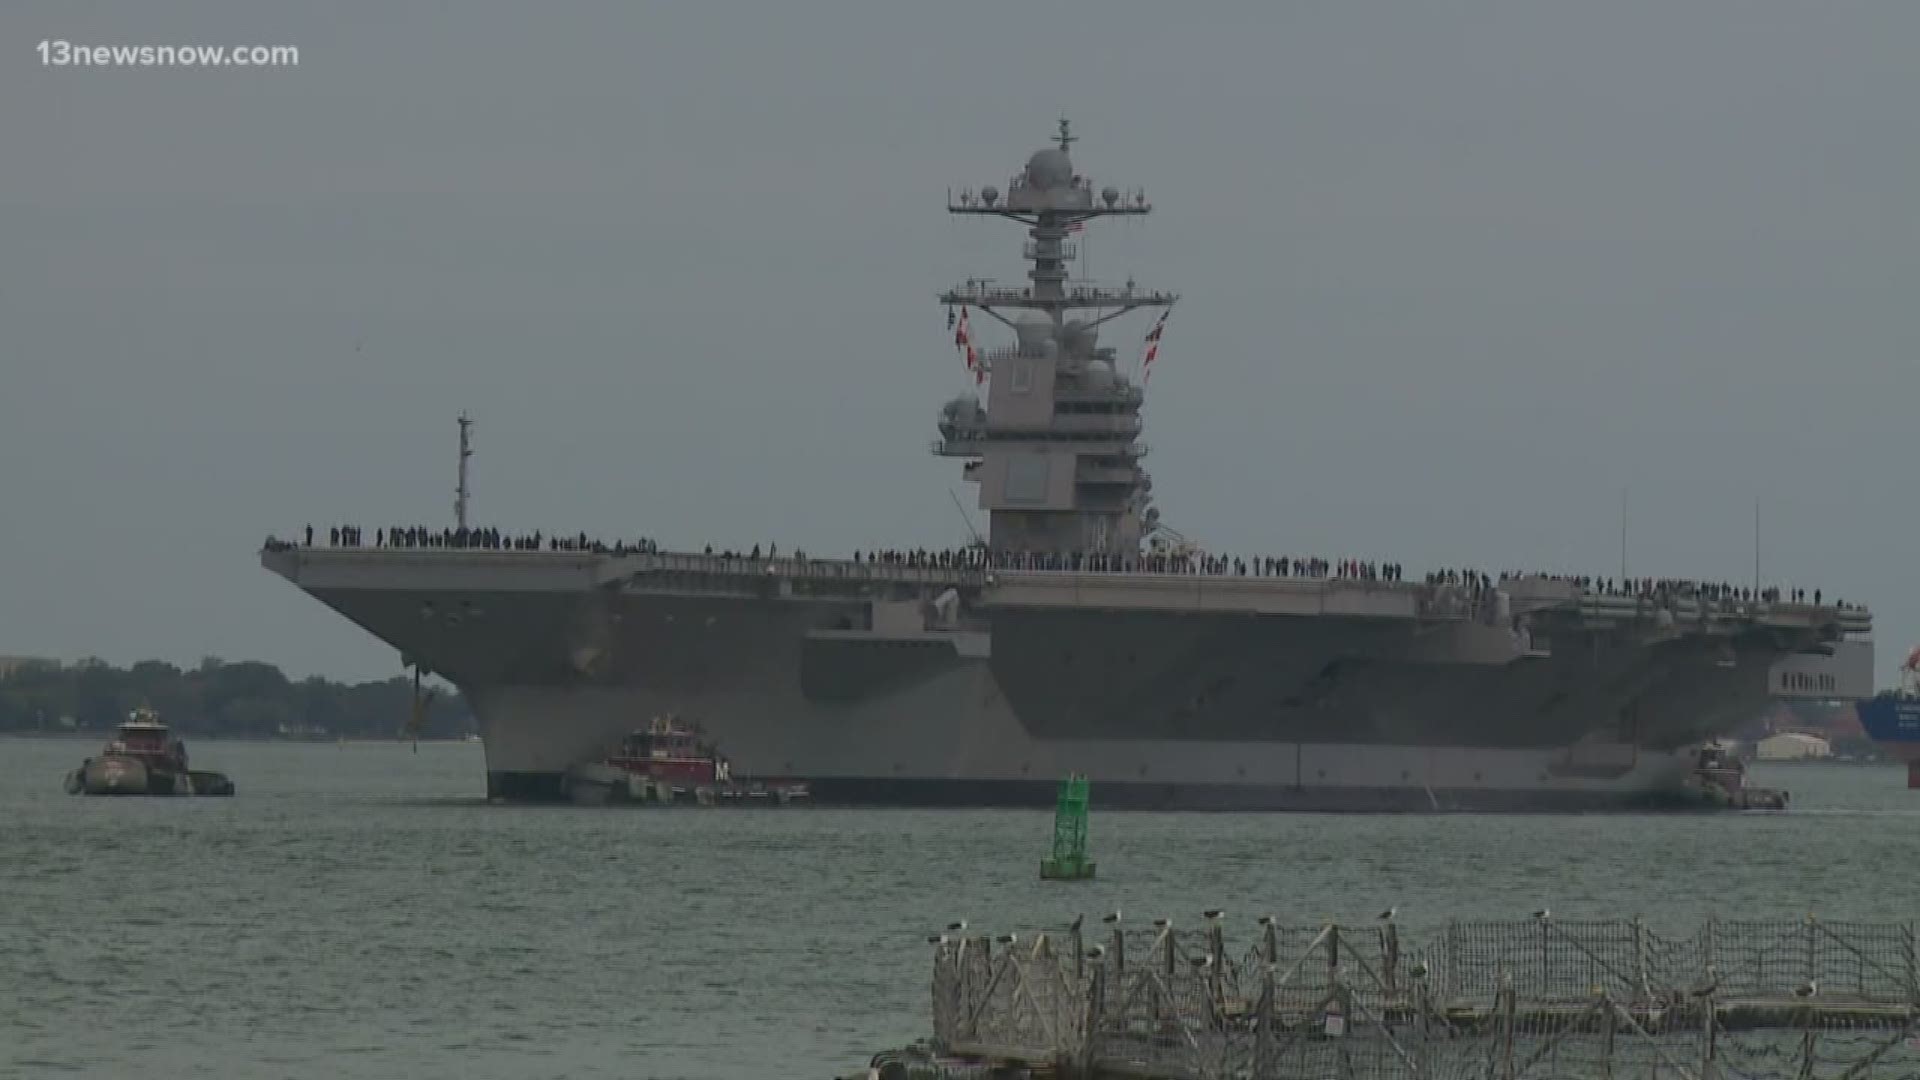 After sitting dockside for more than two years due to issues, the acting secretary of the Navy is pushing to get the USS Gerald R. Ford combat-ready ASAP.